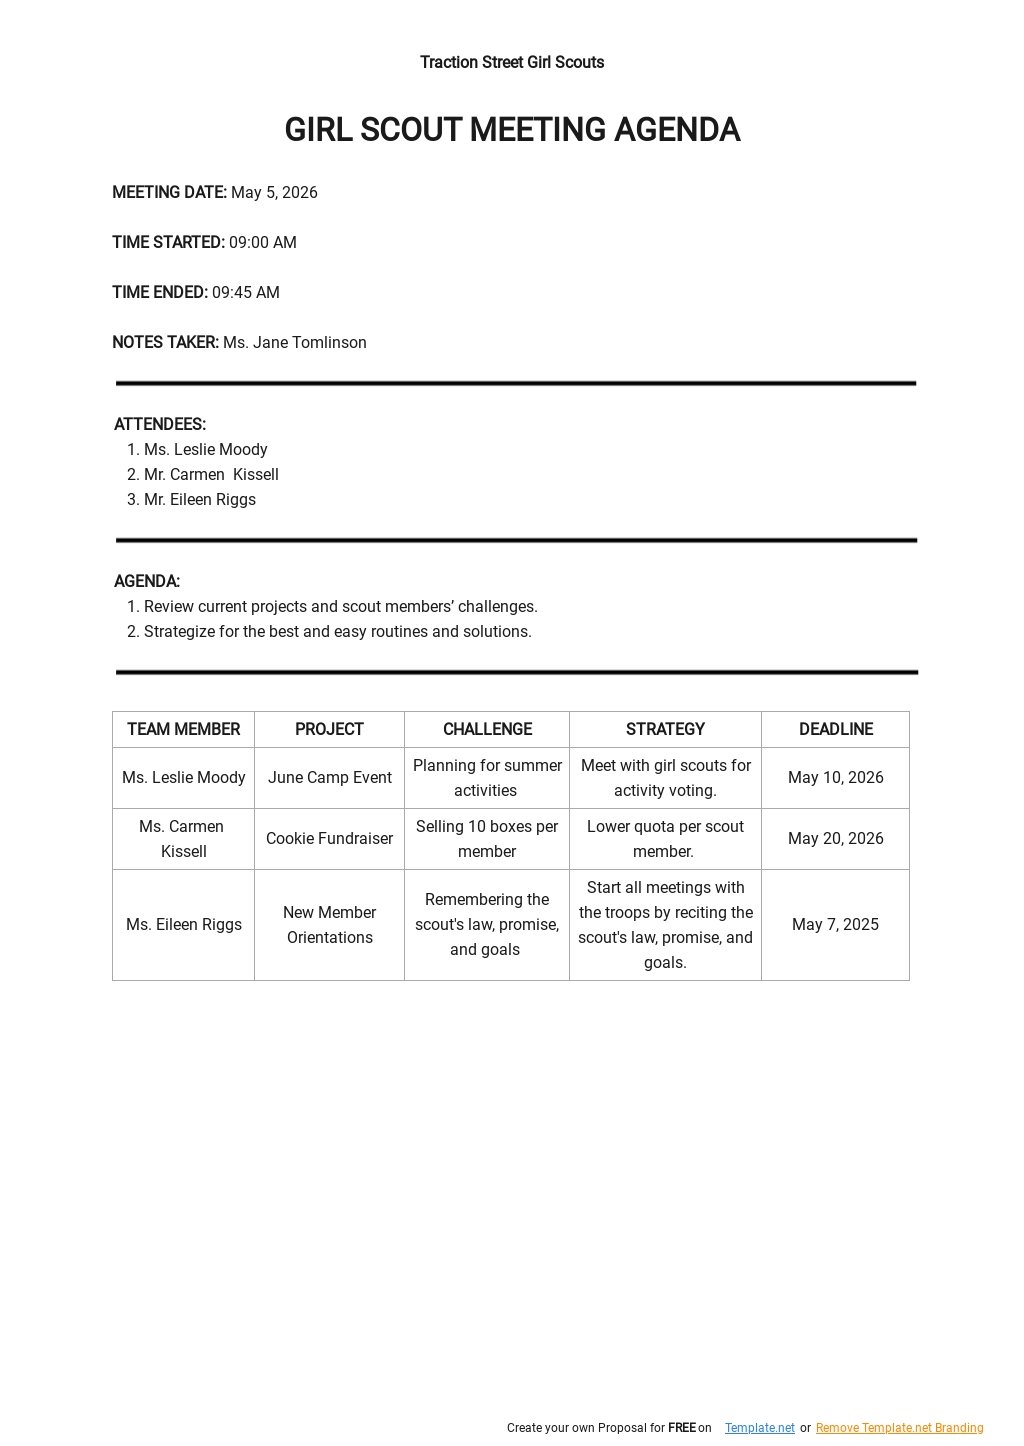 Girl Scout Meeting Agenda Template